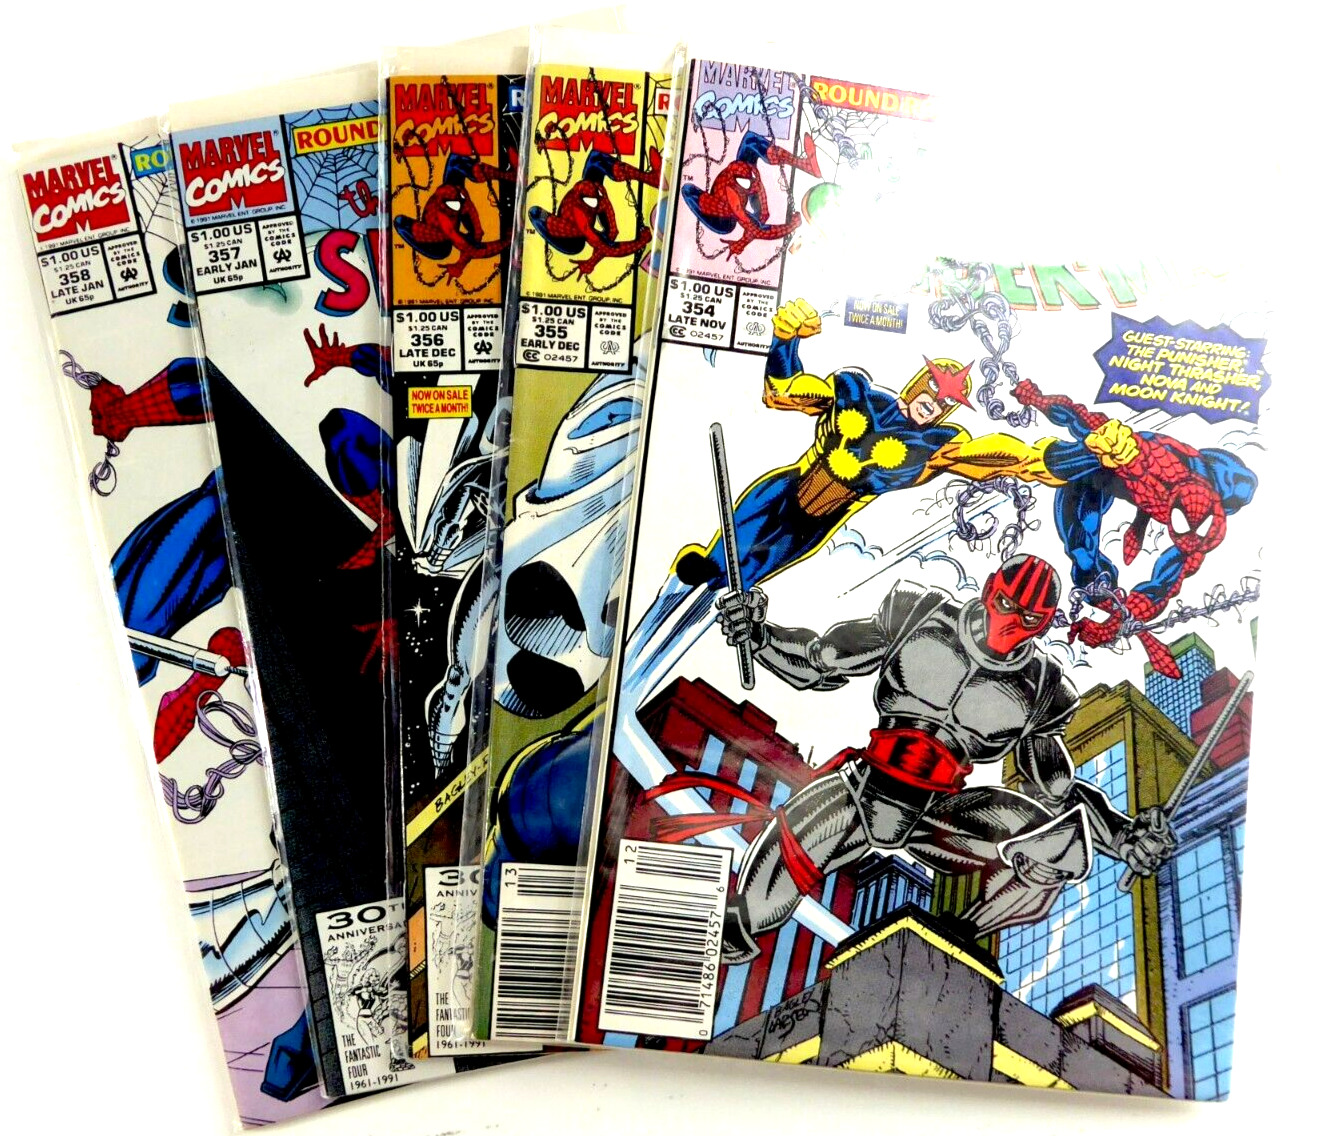 Marvel AMAZING SPIDER-MAN (1991-92) #354 355 356 357 358 Moon Knight VF/NM to NM